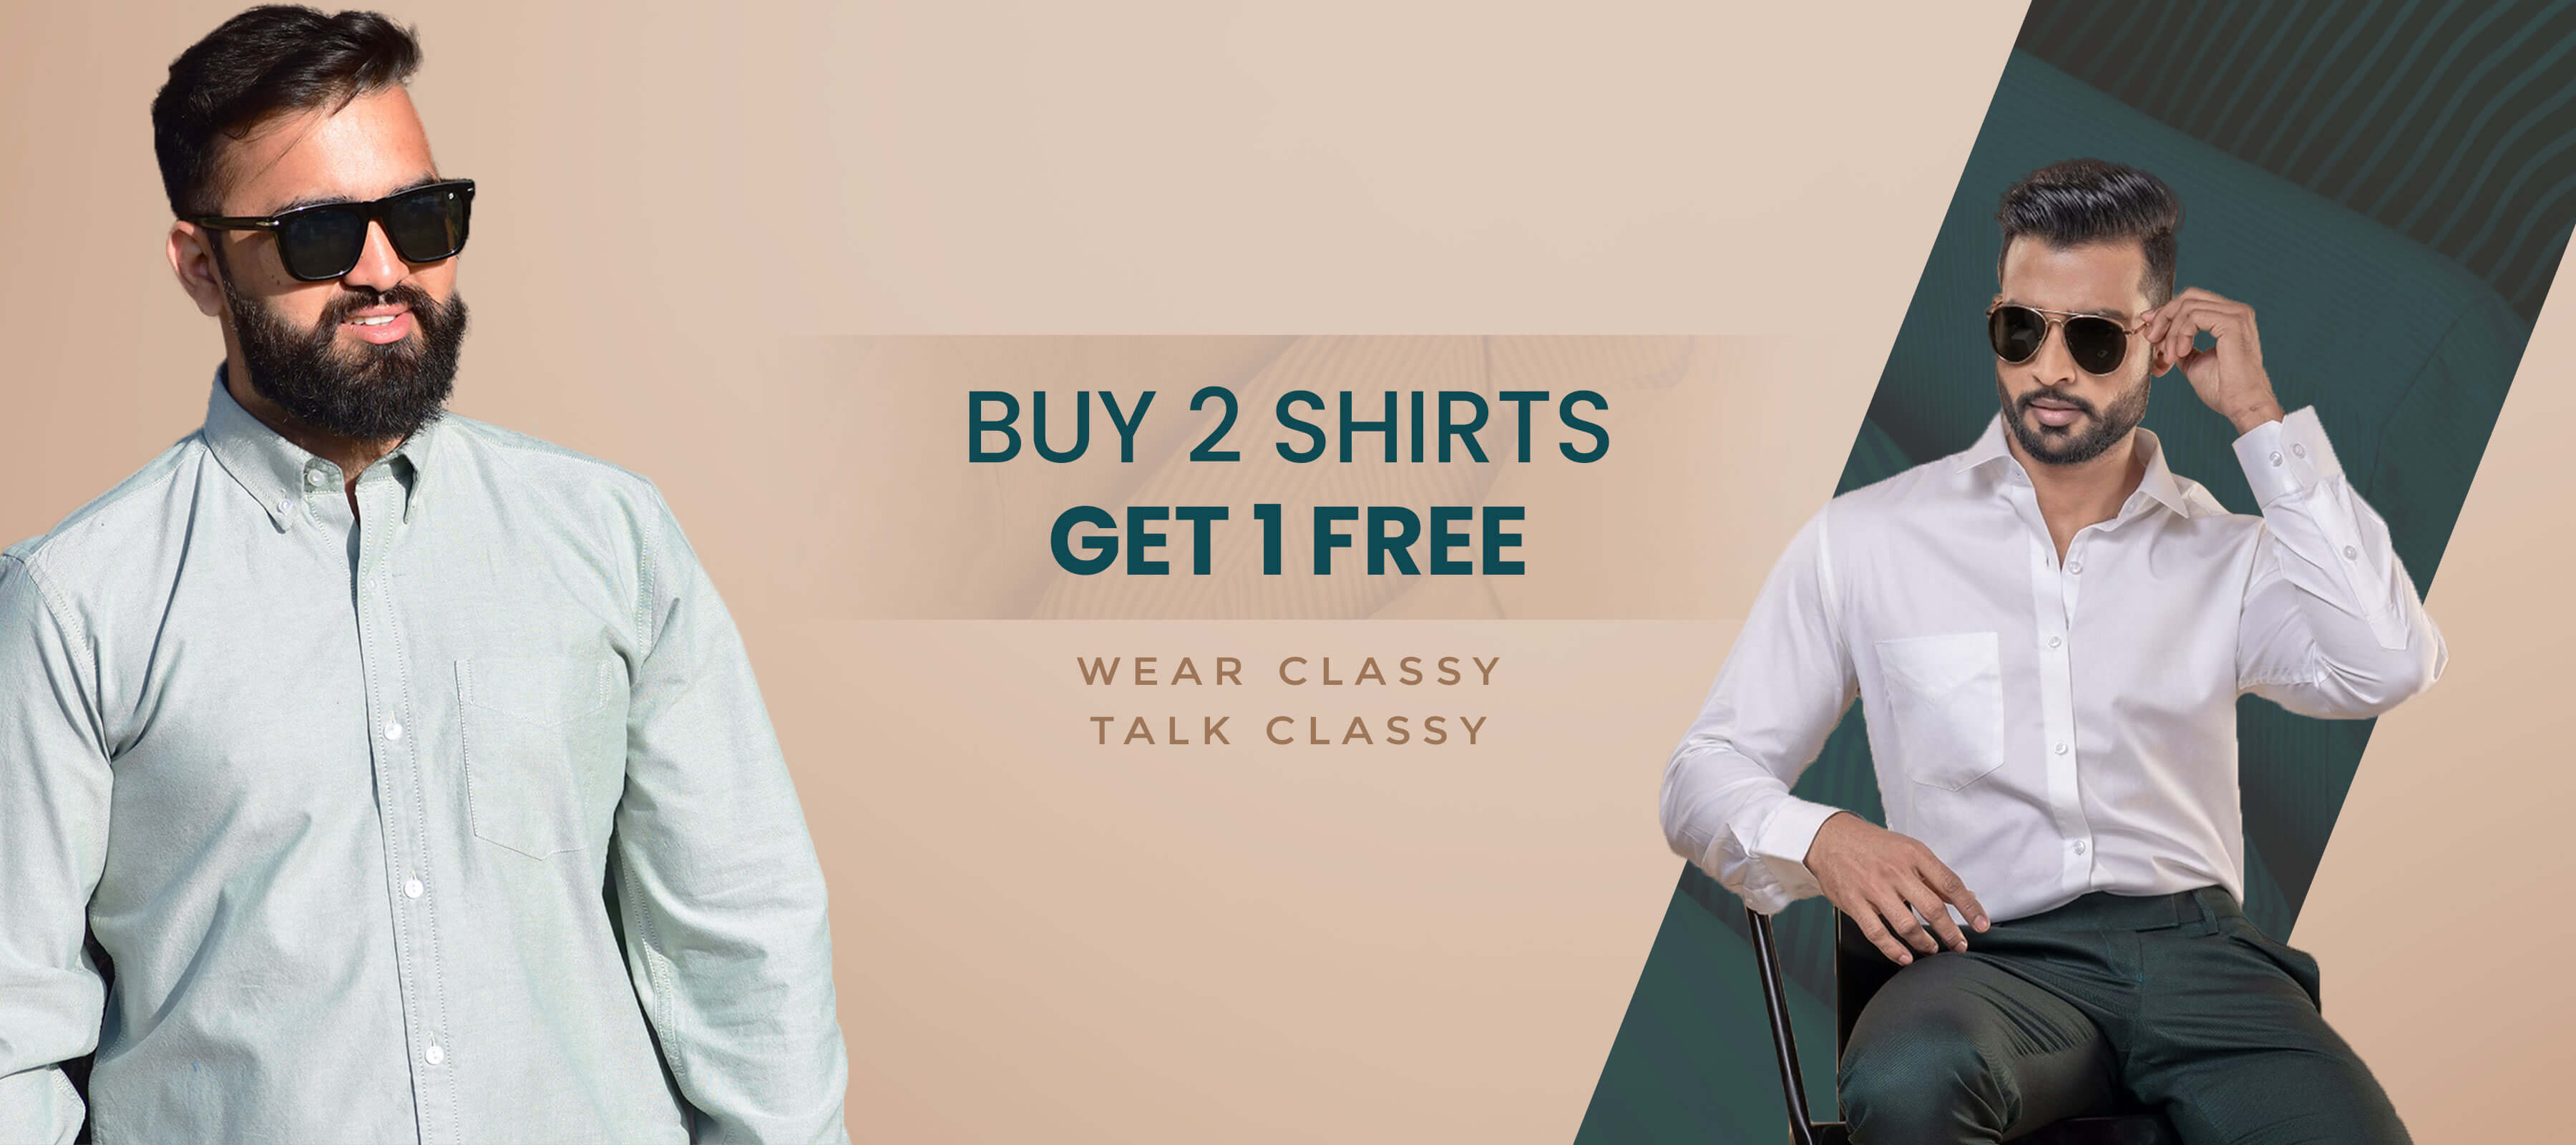 Buy 2 Shirts and Get 1 Free